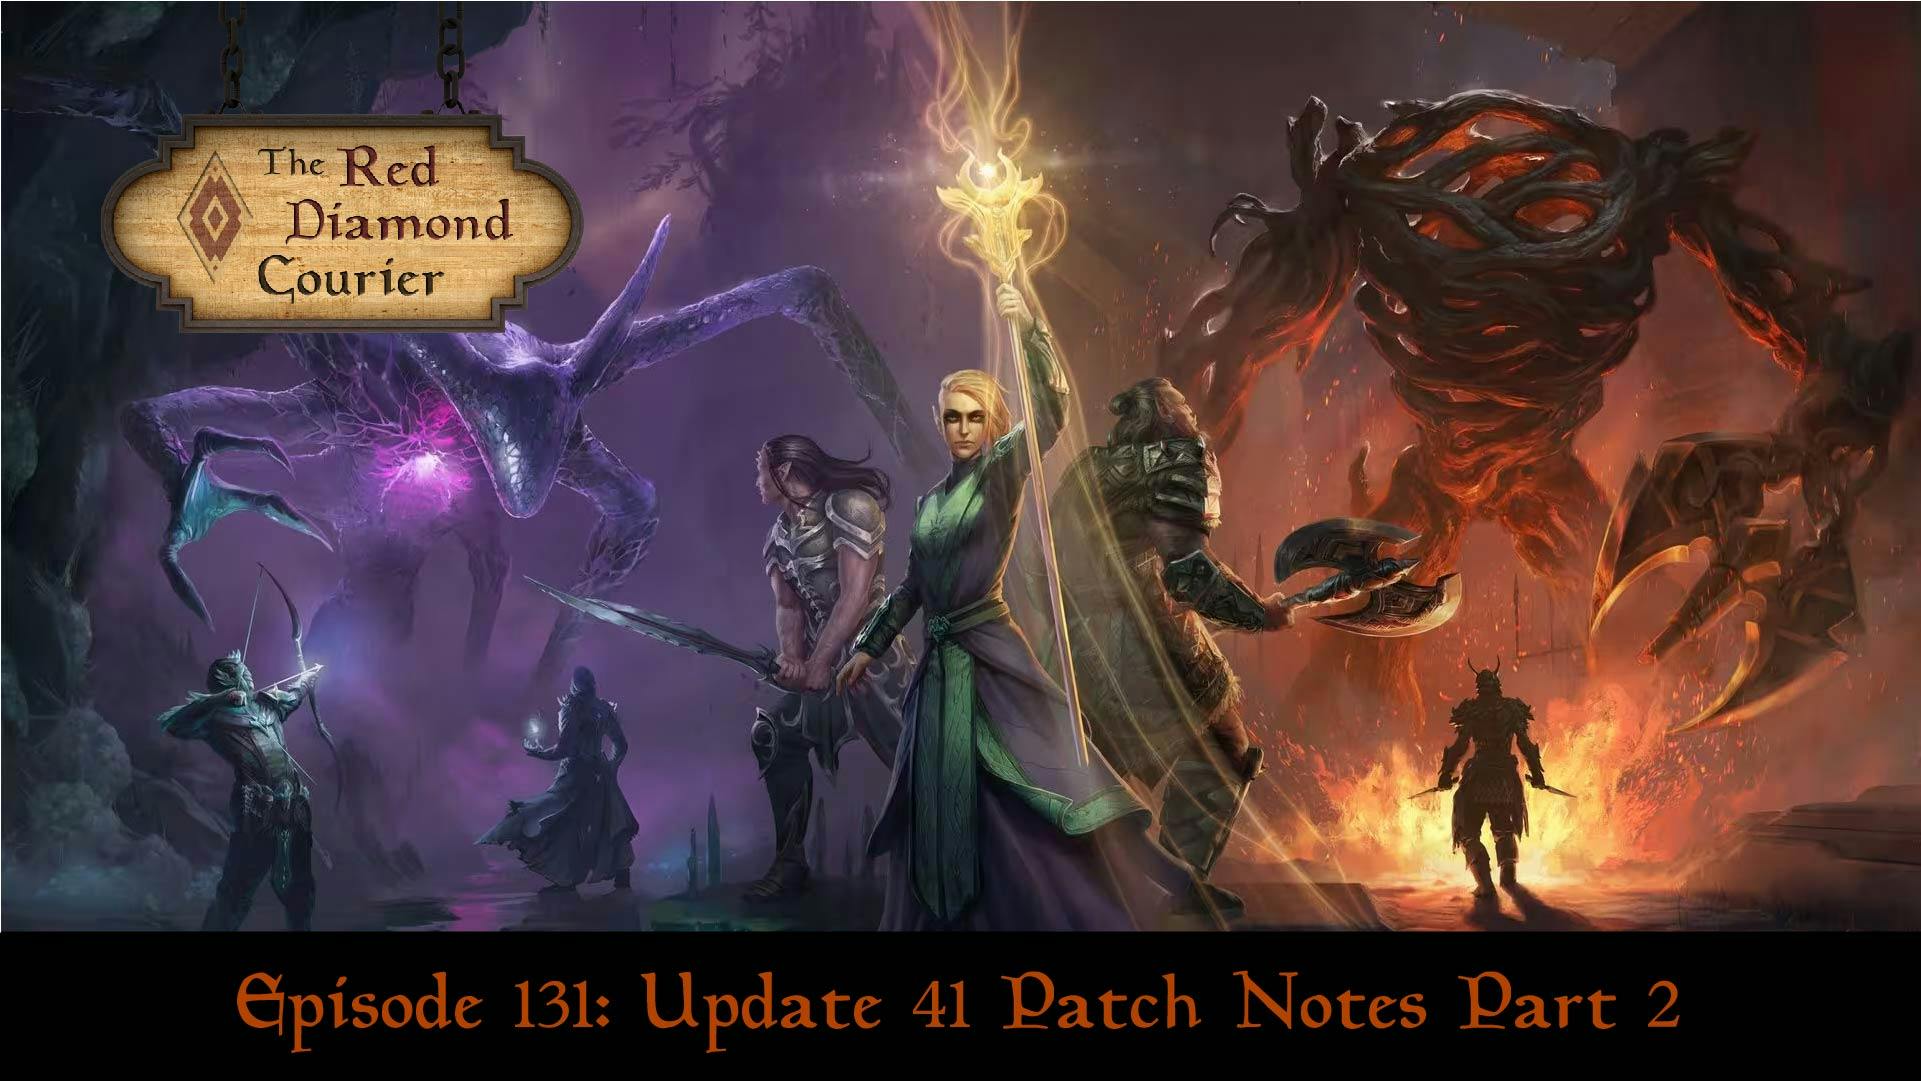 Episode 131: Update 41 Patch Notes Part 2